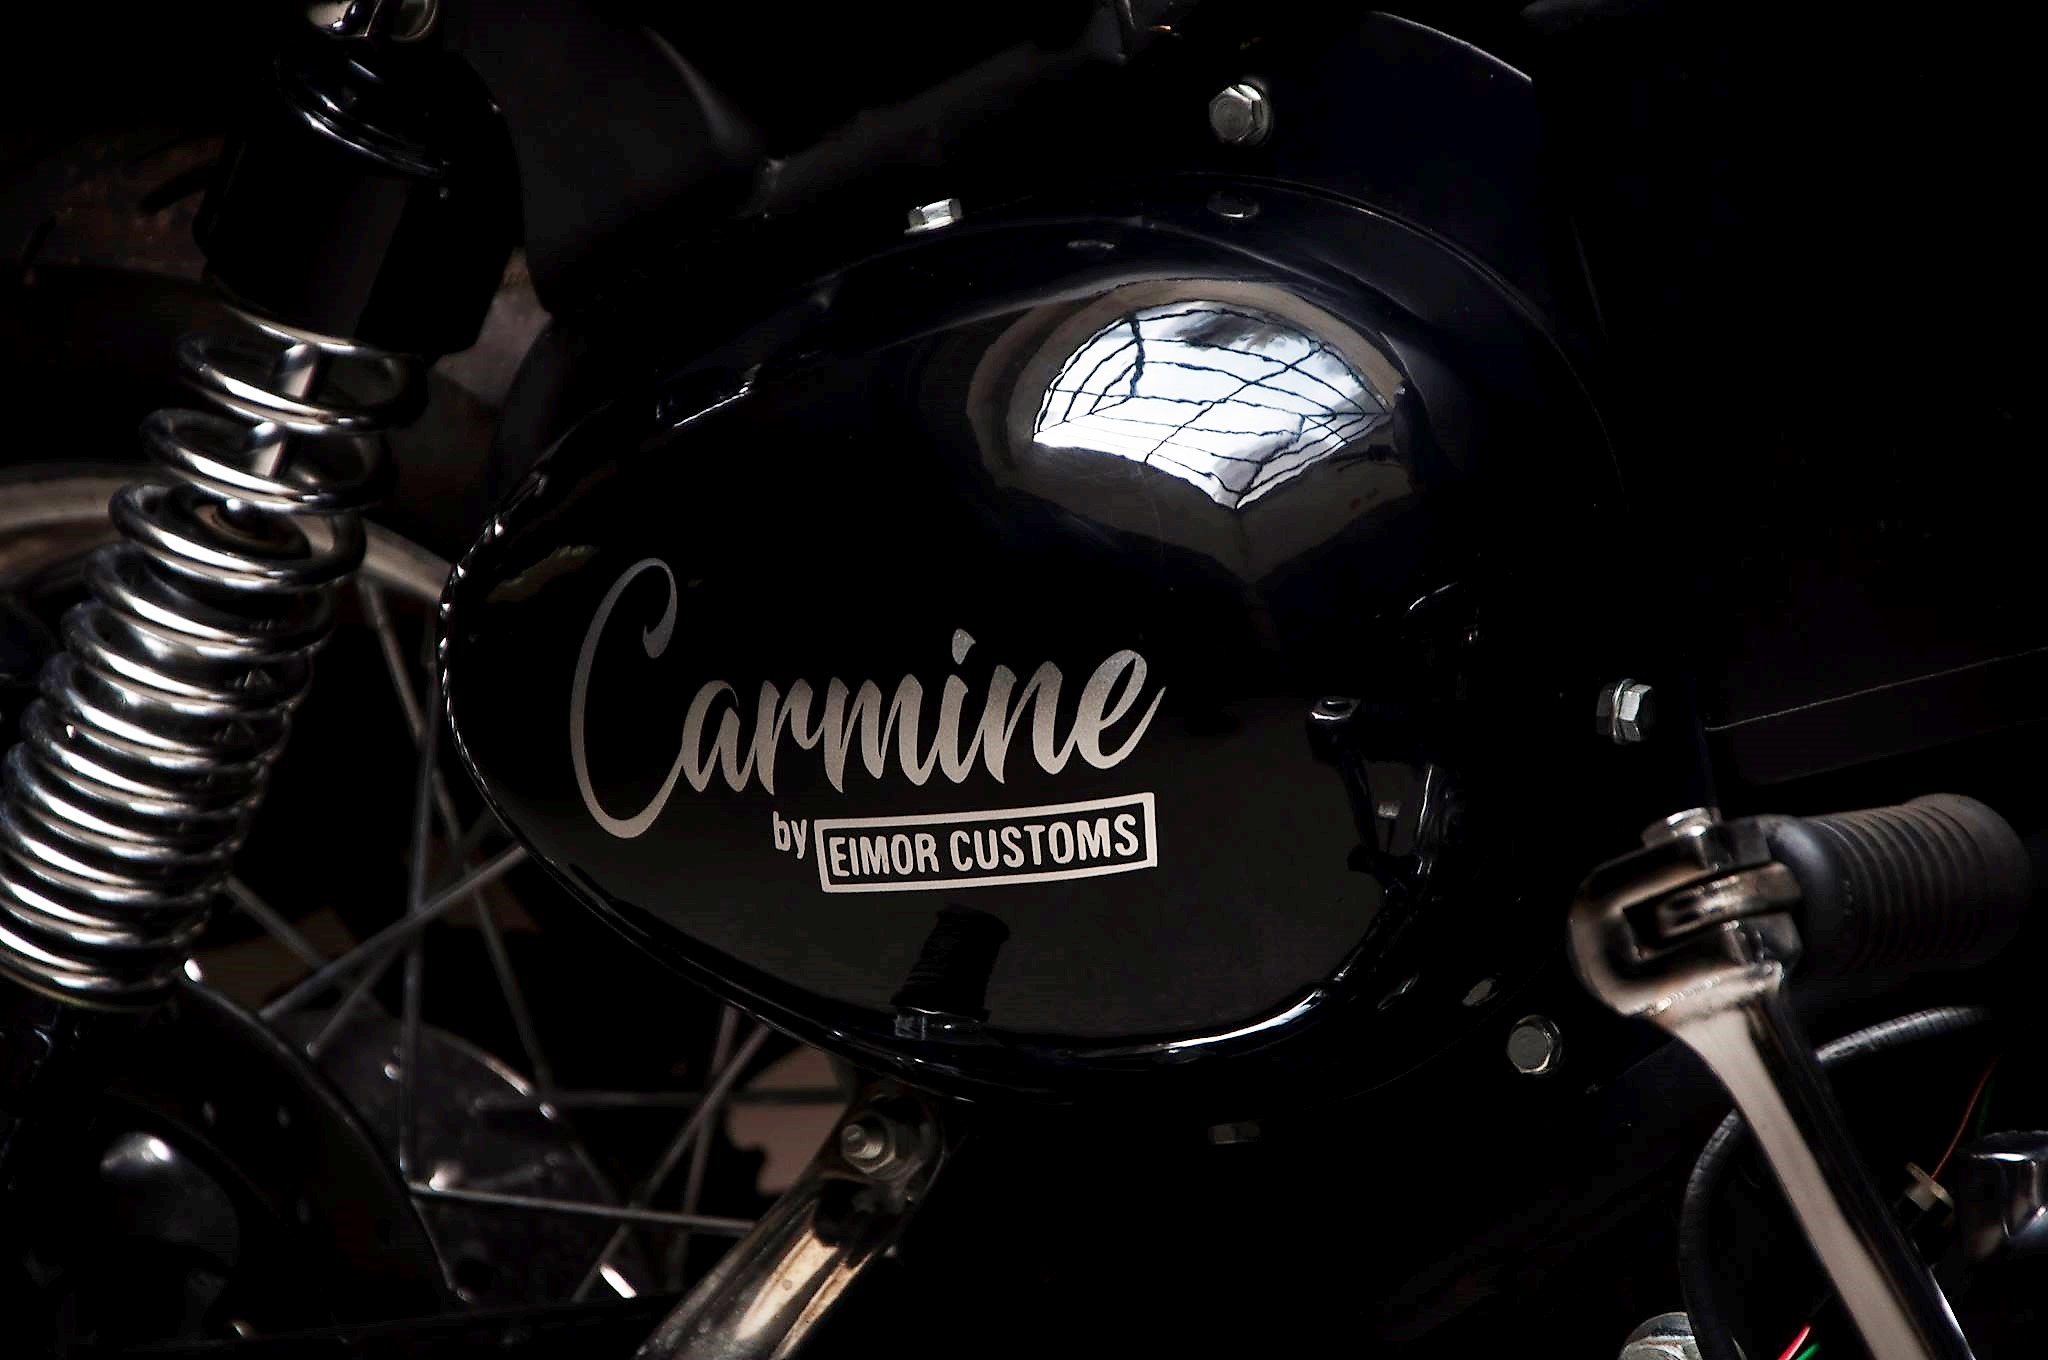 Meet Royal Enfield Carmine 350 Equipped with Premium Parts - shot